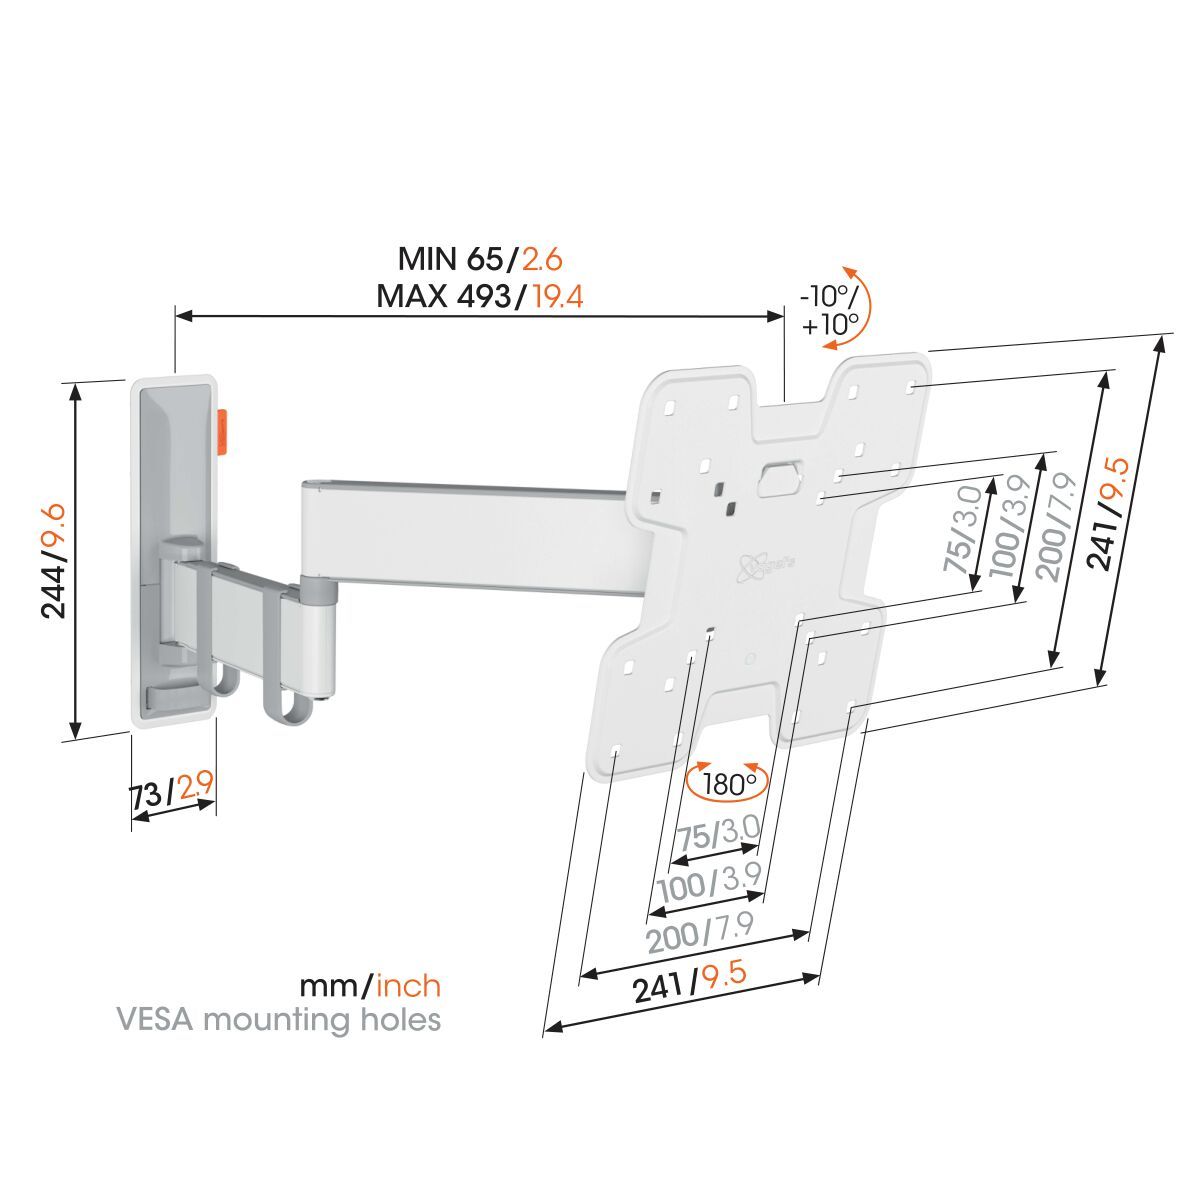 Vogel's TVM 3243 Full-Motion TV Wall Mount (white) - Suitable for 19 up to 43 inch TVs - Full motion (up to 180°) swivel - Tilt up to 20° - Dimensions